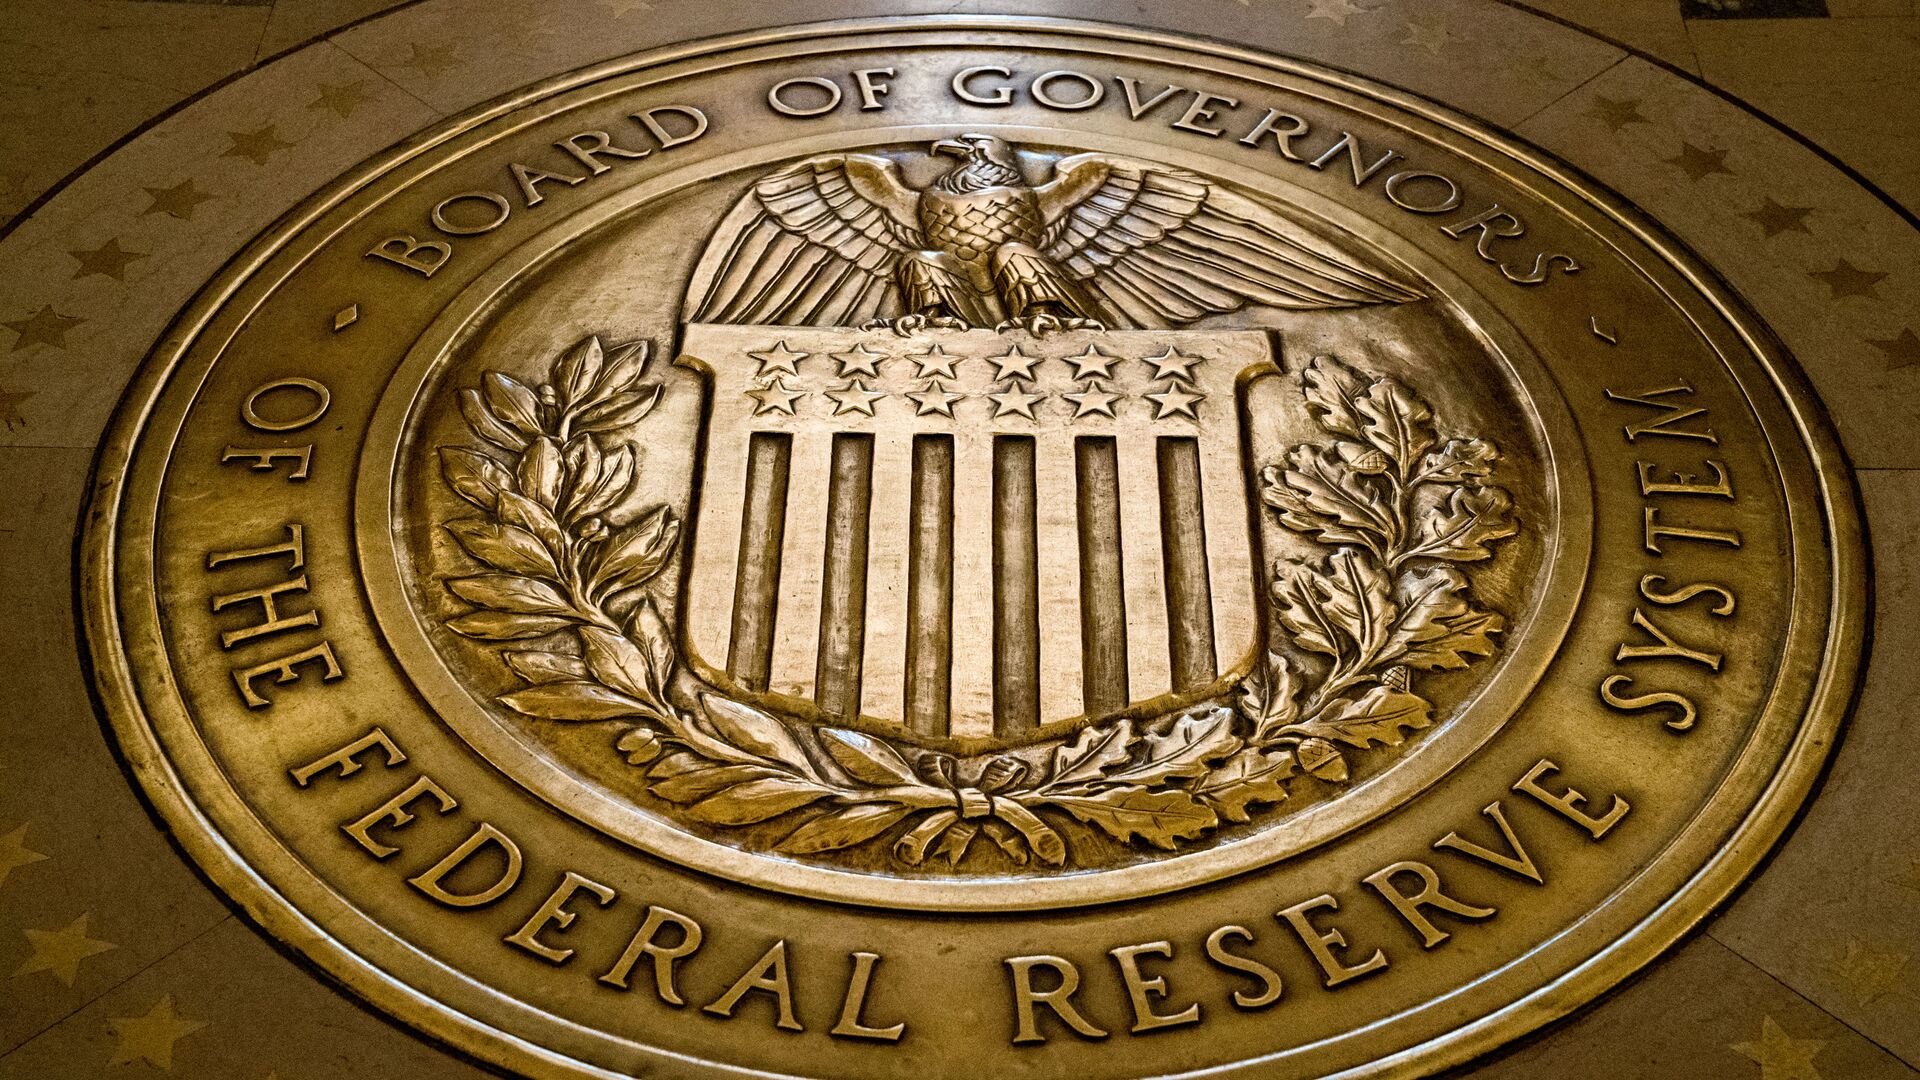 FILE- In this Feb. 5, 2018, file photo, the seal of the Board of Governors of the United States Federal Reserve System is displayed in the ground at the Marriner S. Eccles Federal Reserve Board Building in Washington. Richard Clarida, President Donald Trump's nominee for the No. 2 post at the Federal Reserve, pledged on Tuesday, May 15, to support the Fed's twin goals of stabilizing inflation and maximizing employment while also declaring the importance of the central bank’s independence.  - Sputnik International, 1920, 22.03.2023